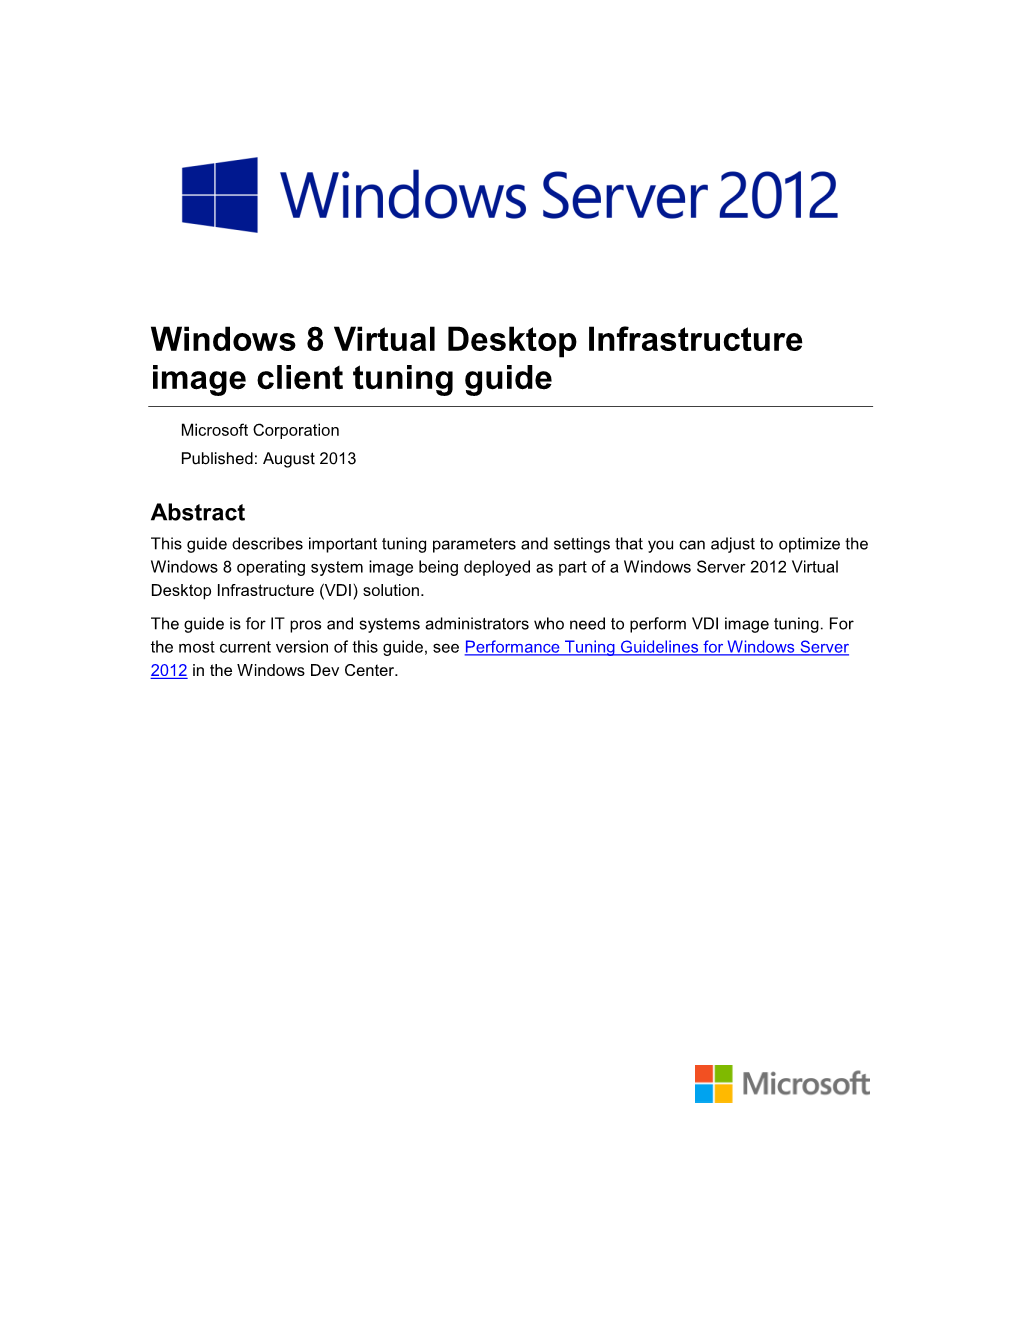 Windows 8 Virtual Desktop Infrastructure Image Client Tuning Guide